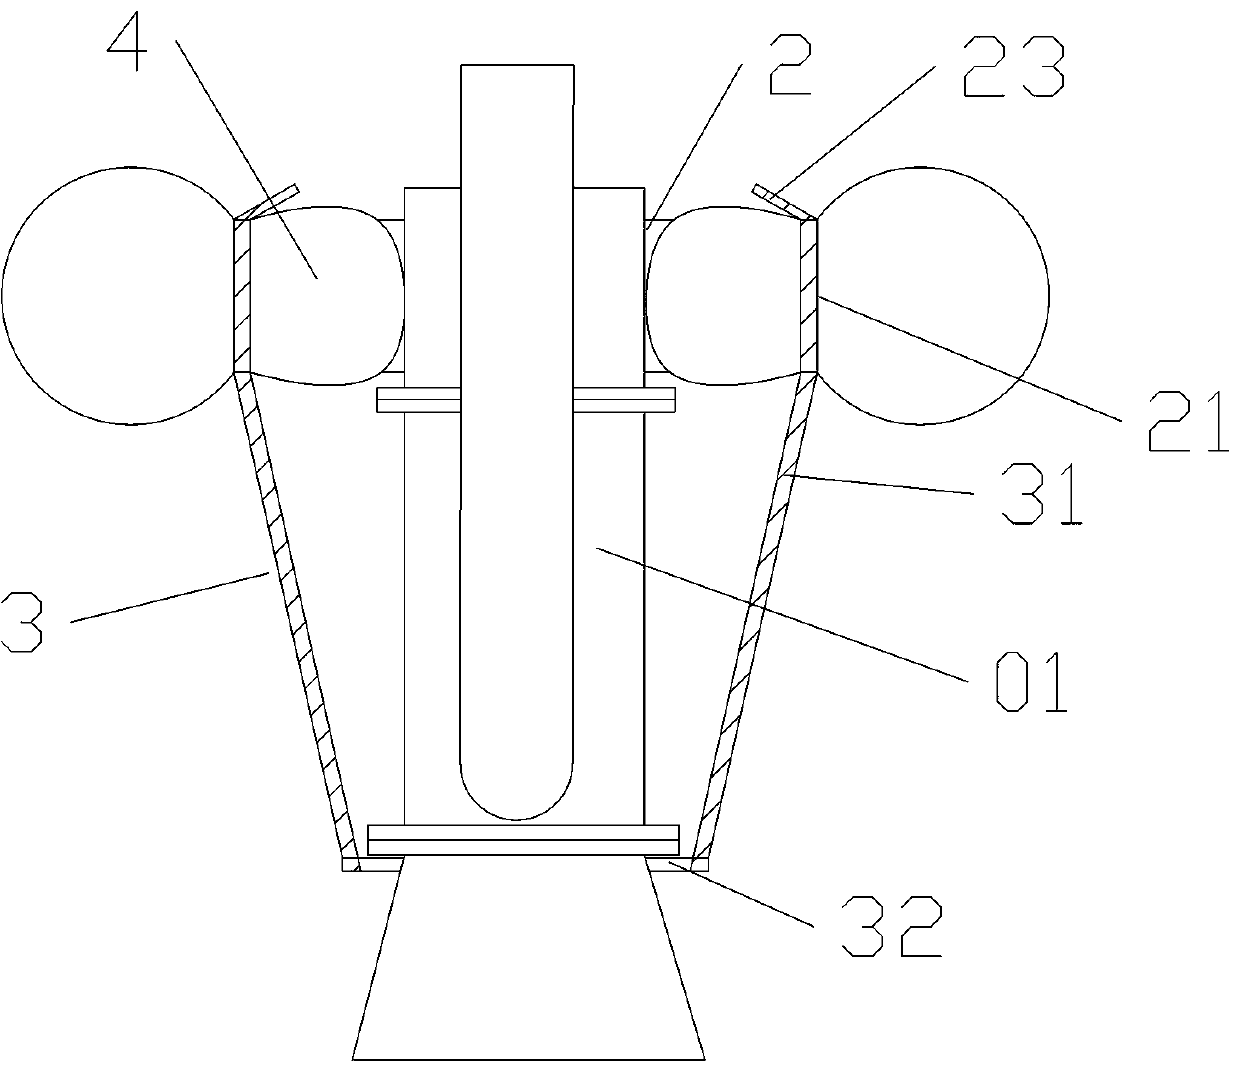 Suspension device of submersible pump